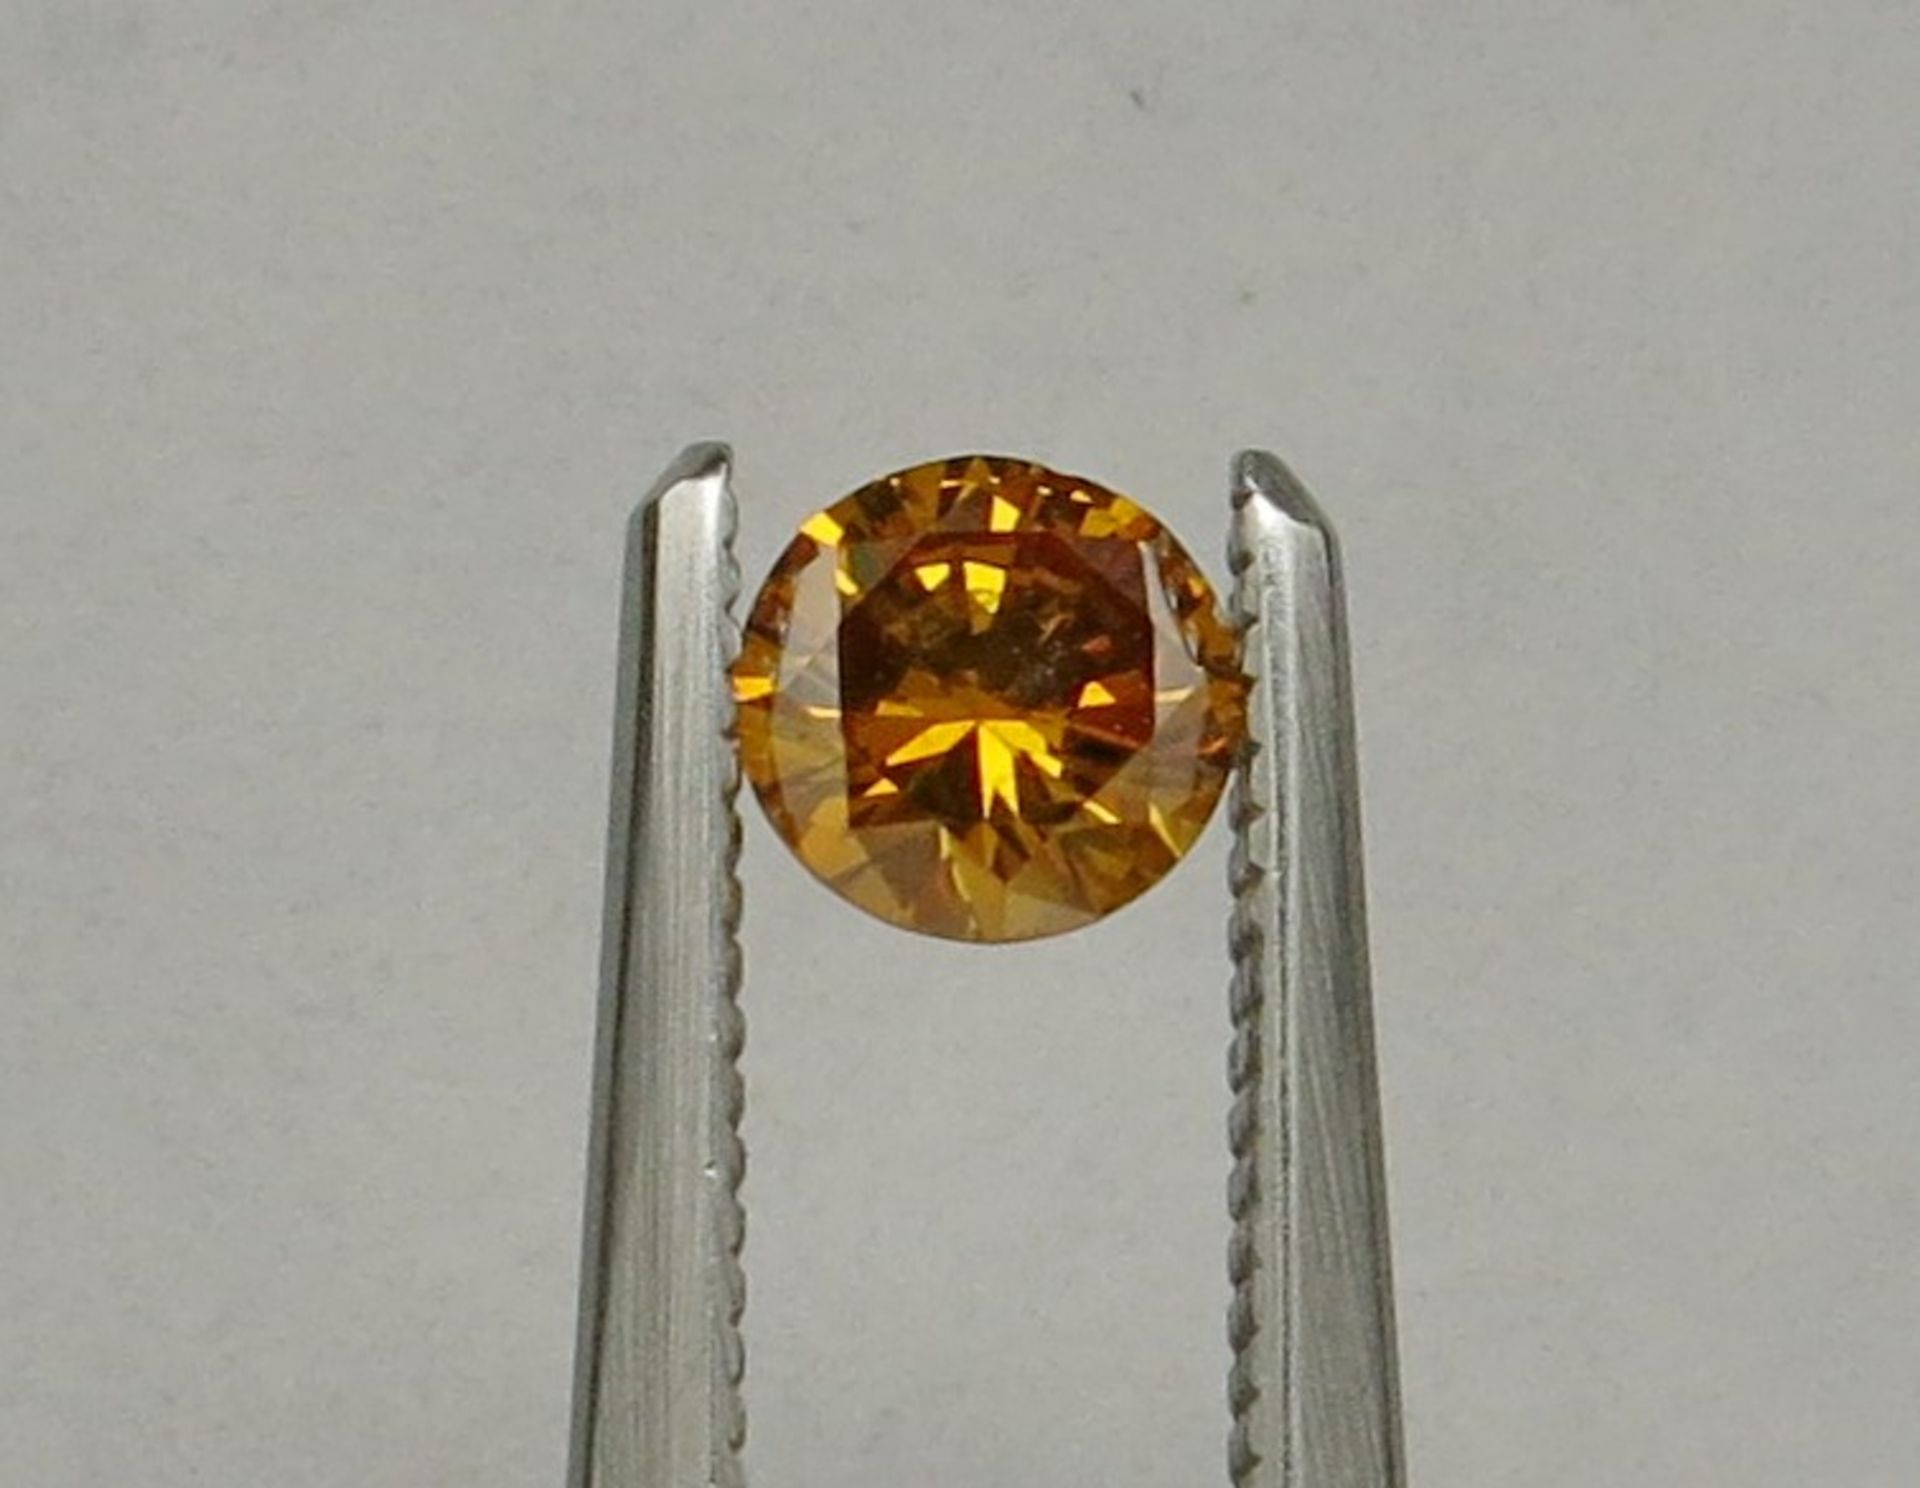 An unmounted Round-shaped diamond weighing app. 0.35ct. Colour : Orange Yellow .Clarity :I1